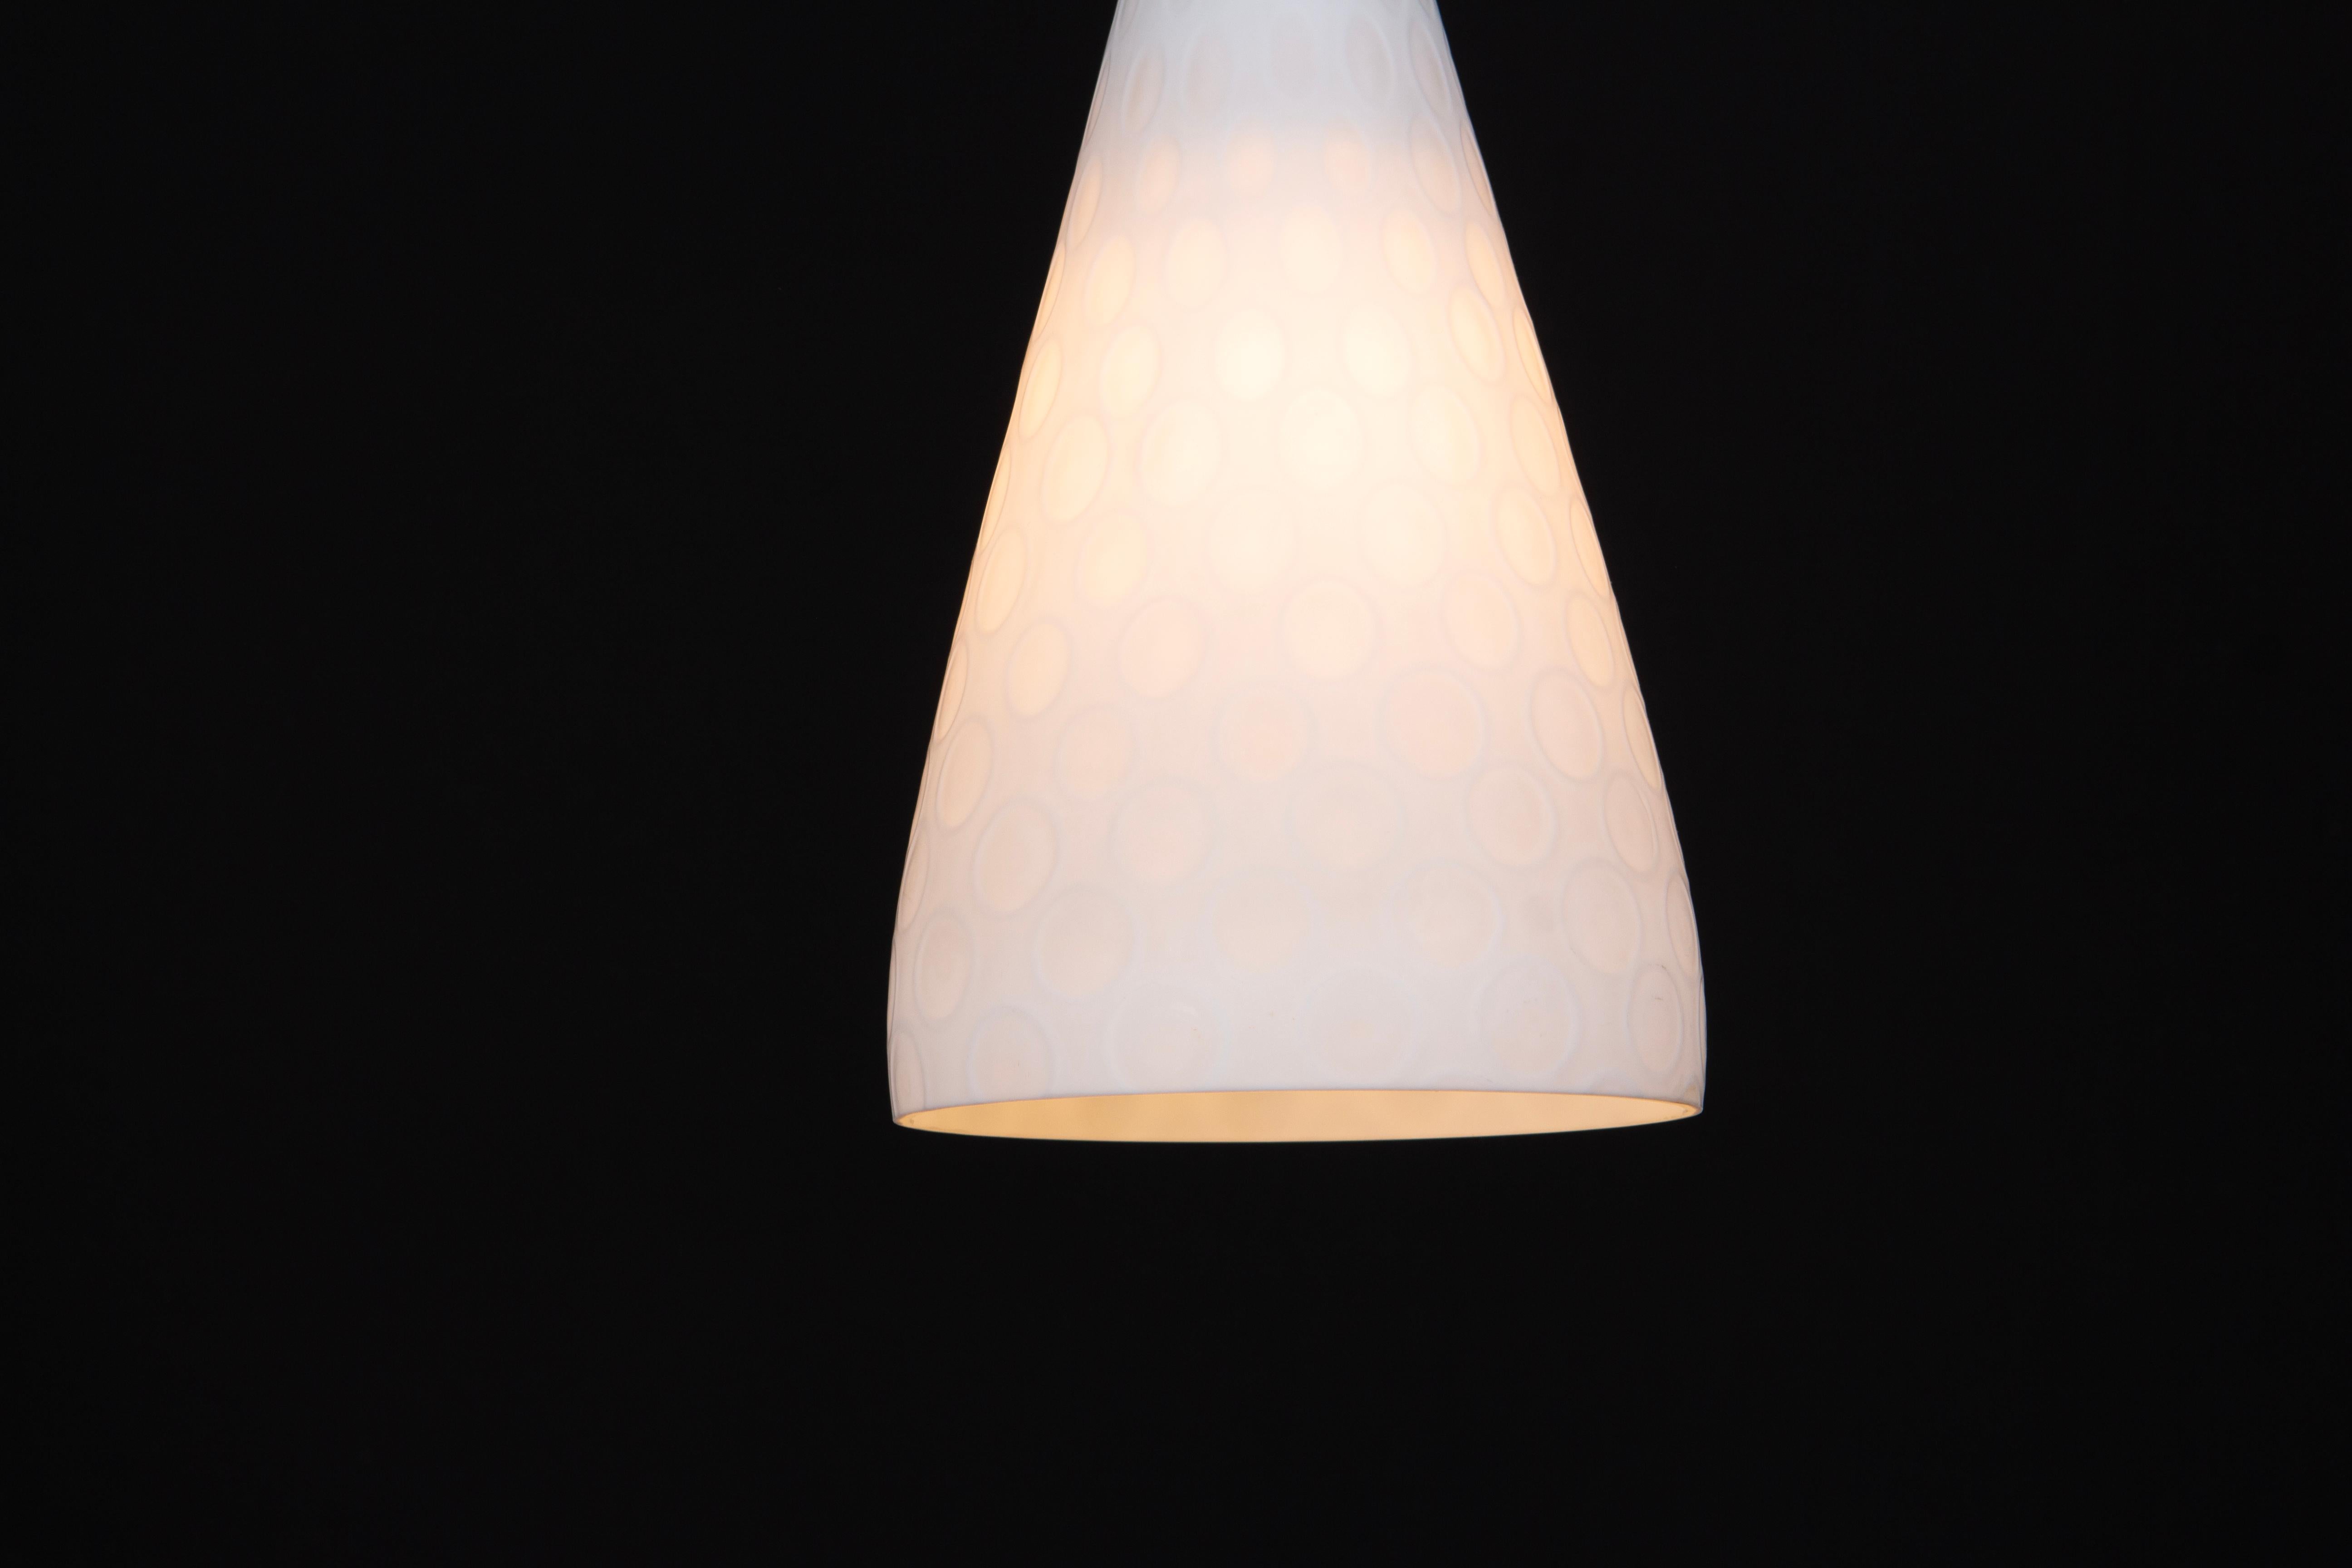 1 of 2 Petite Pendant Lights by Gangkofner, Peill & Putzler, Germany, 1950s For Sale 2